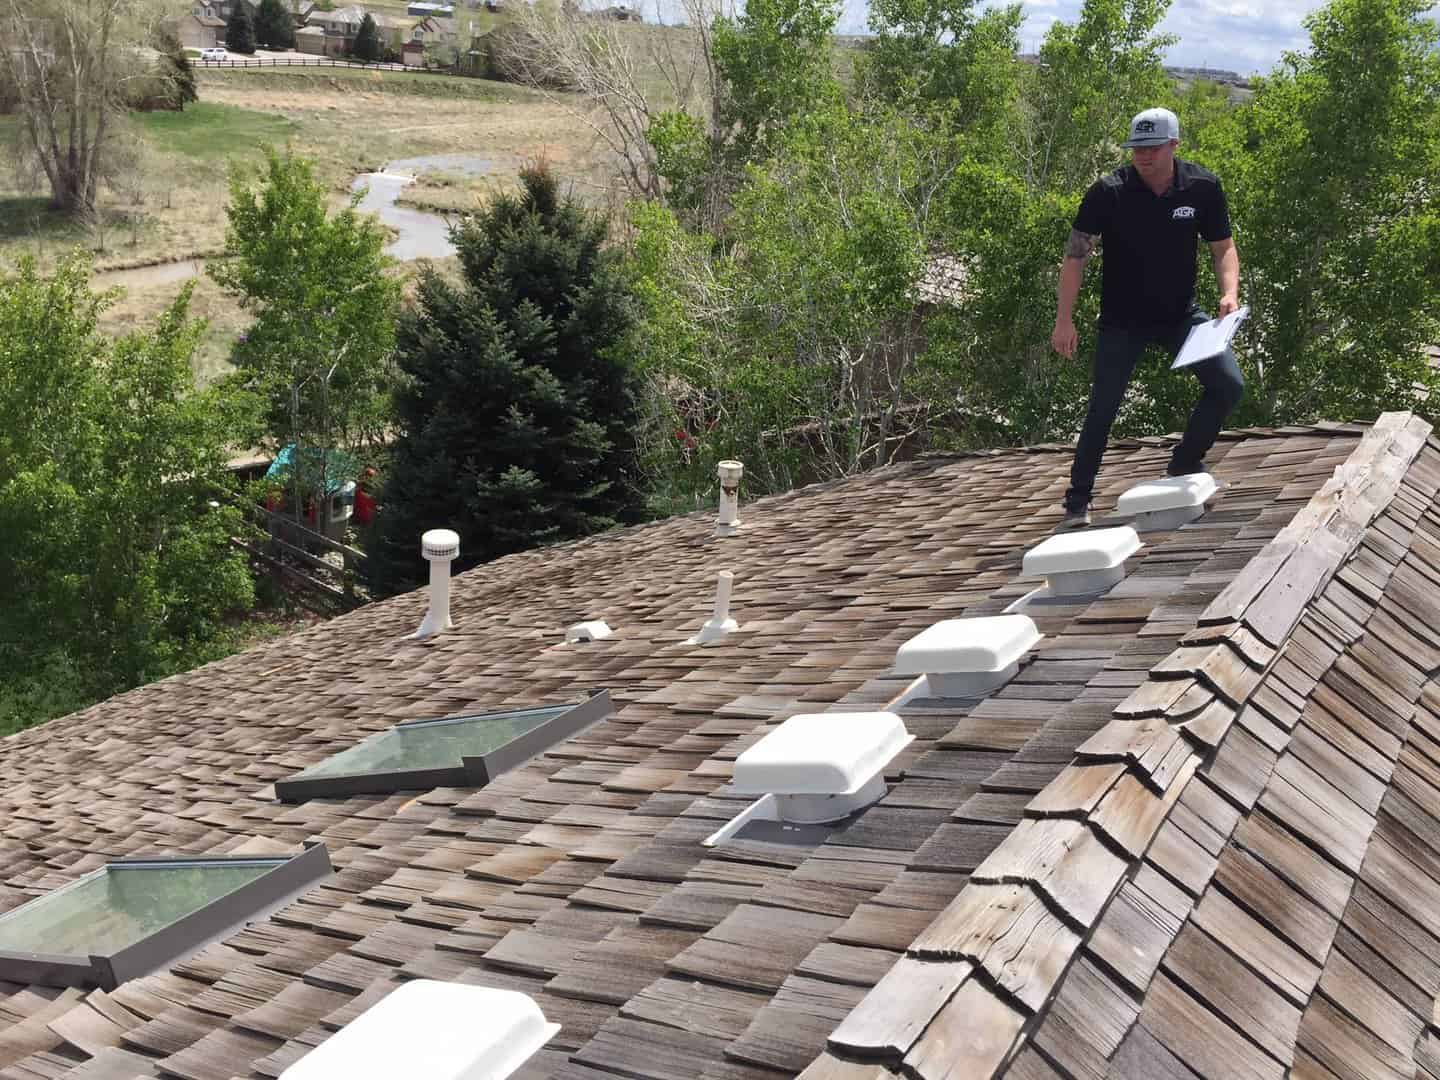 des moines Roof being inspected after hail storm from des moines roofing company